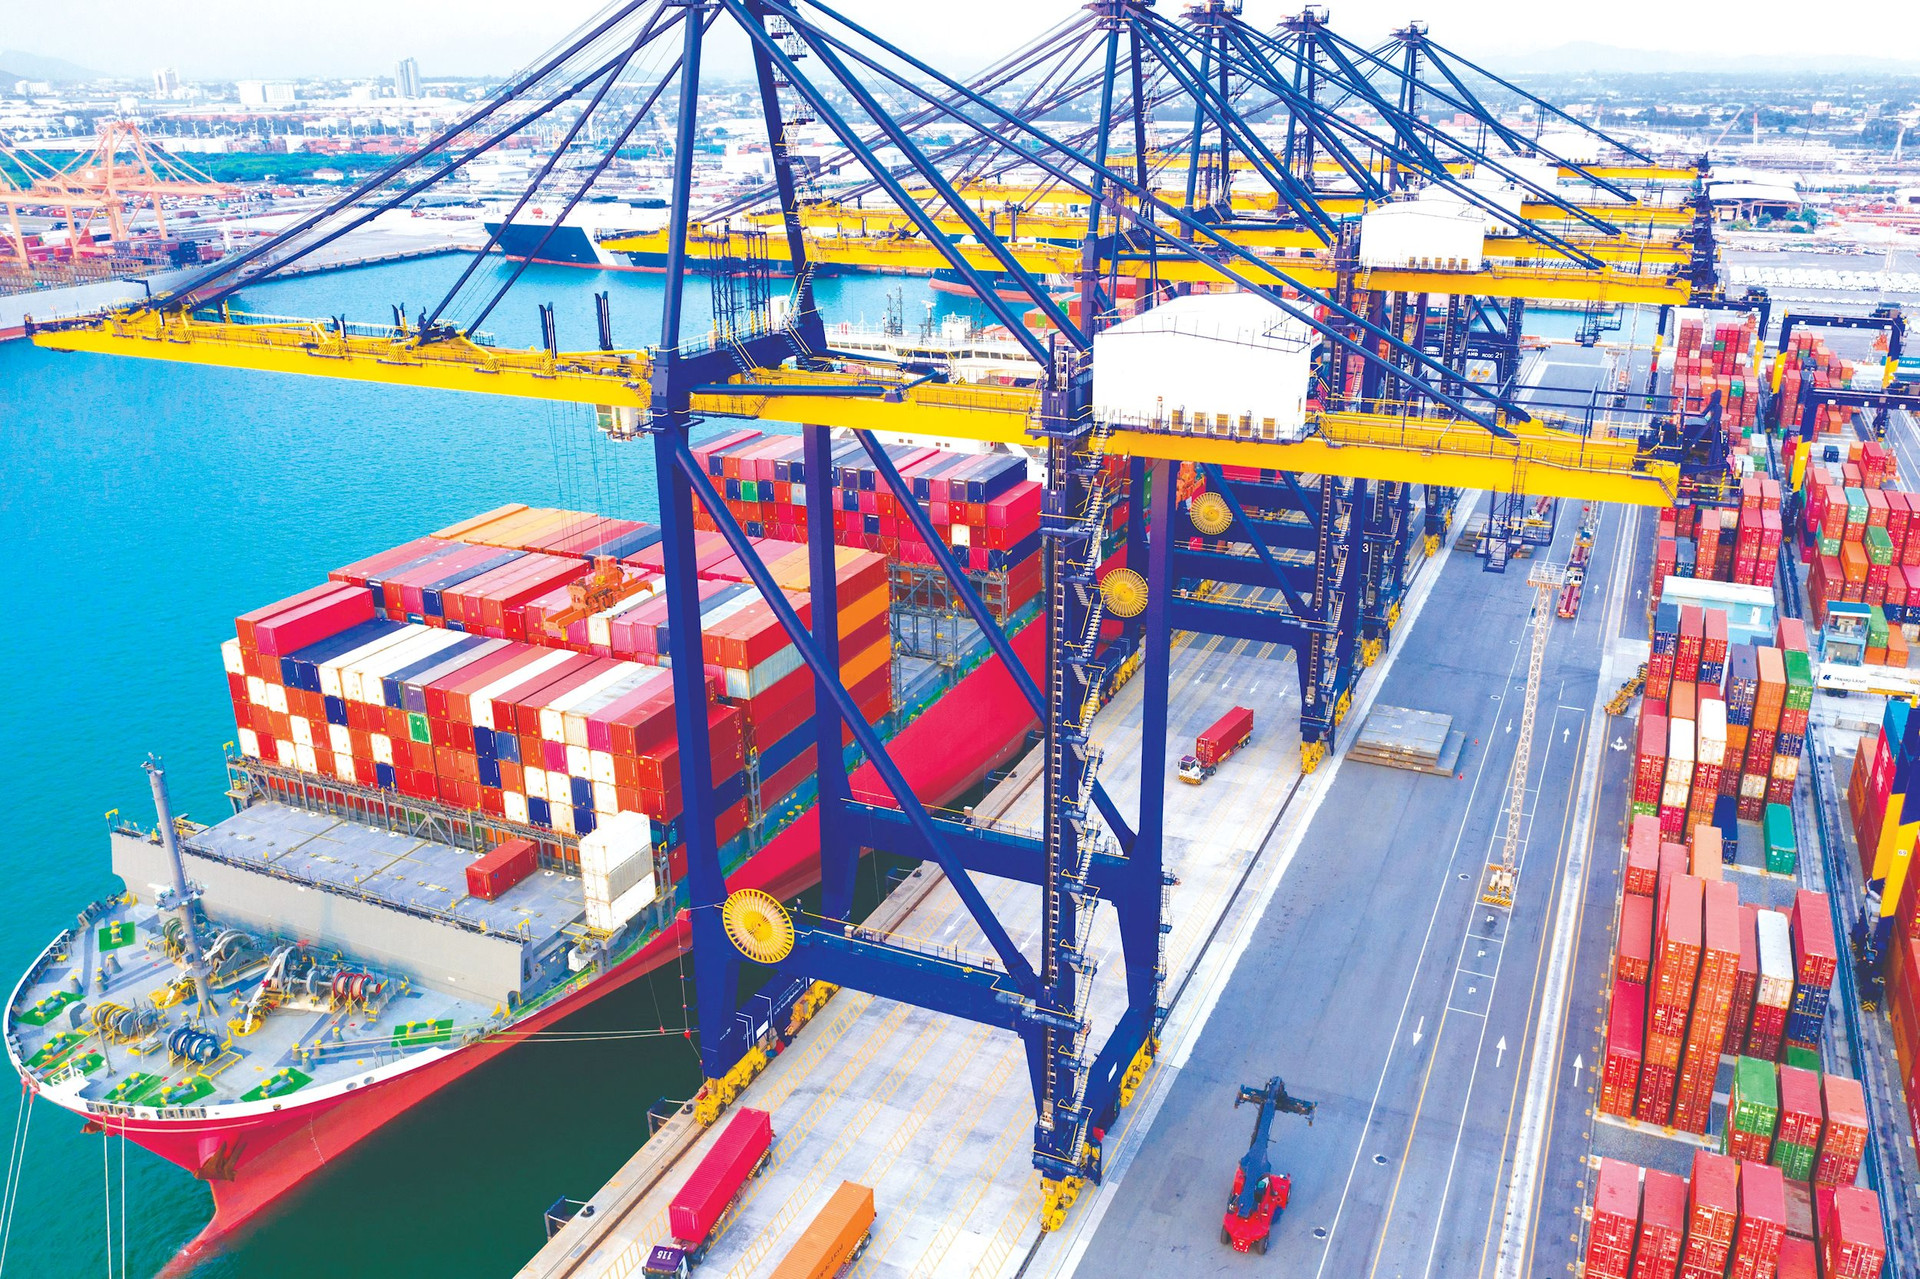 container-ships-industrial-ports-business-import-export-logistics-supplychain-compressed.jpeg